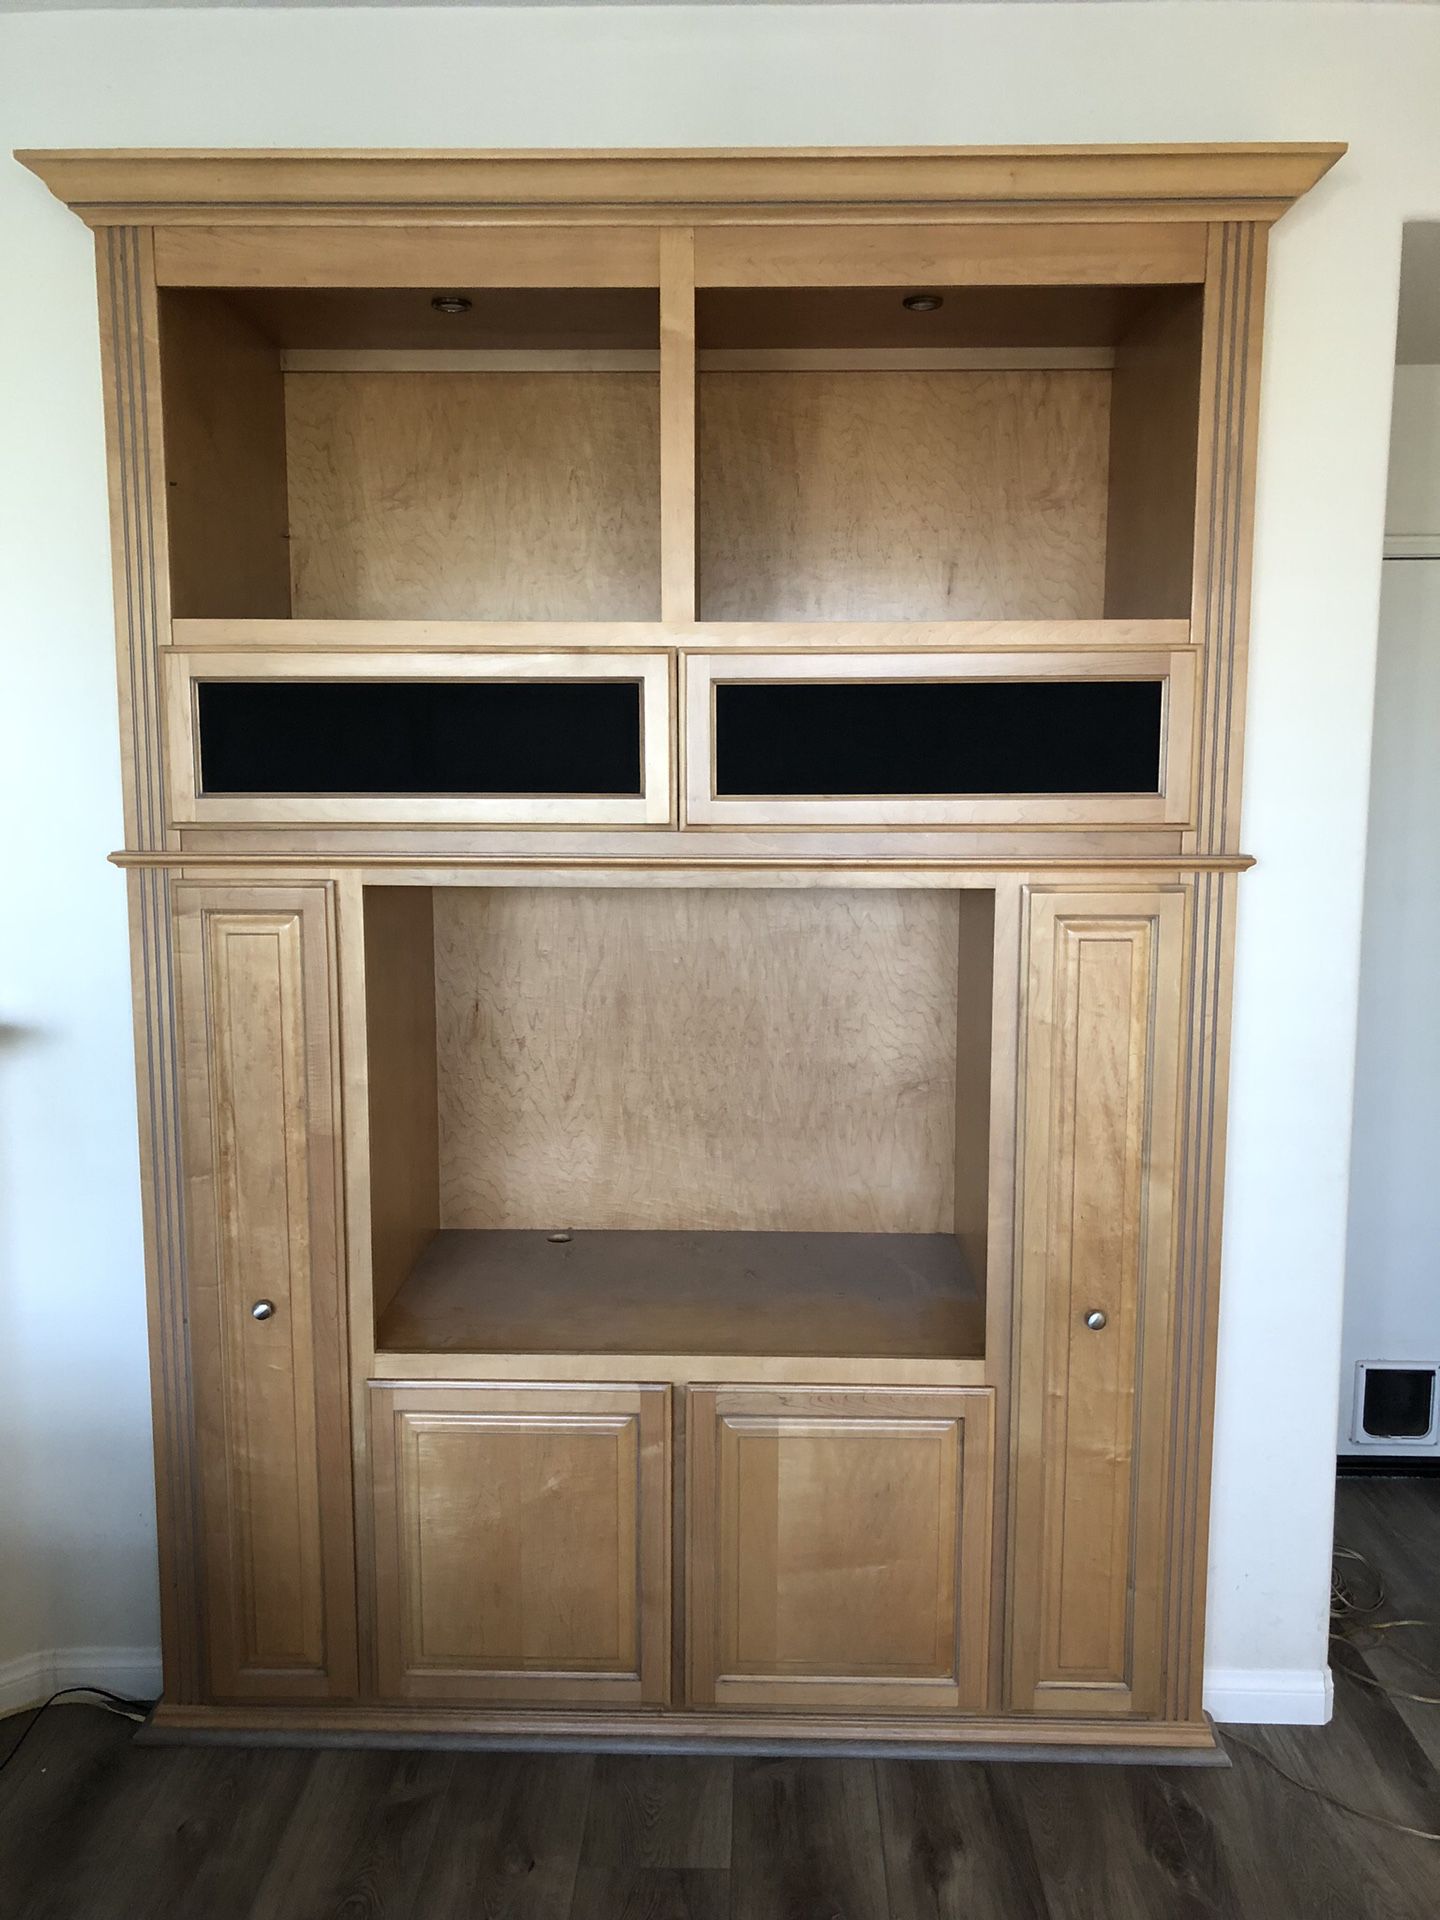 ENTERTAINMENT CENTER- Built in - solid maple